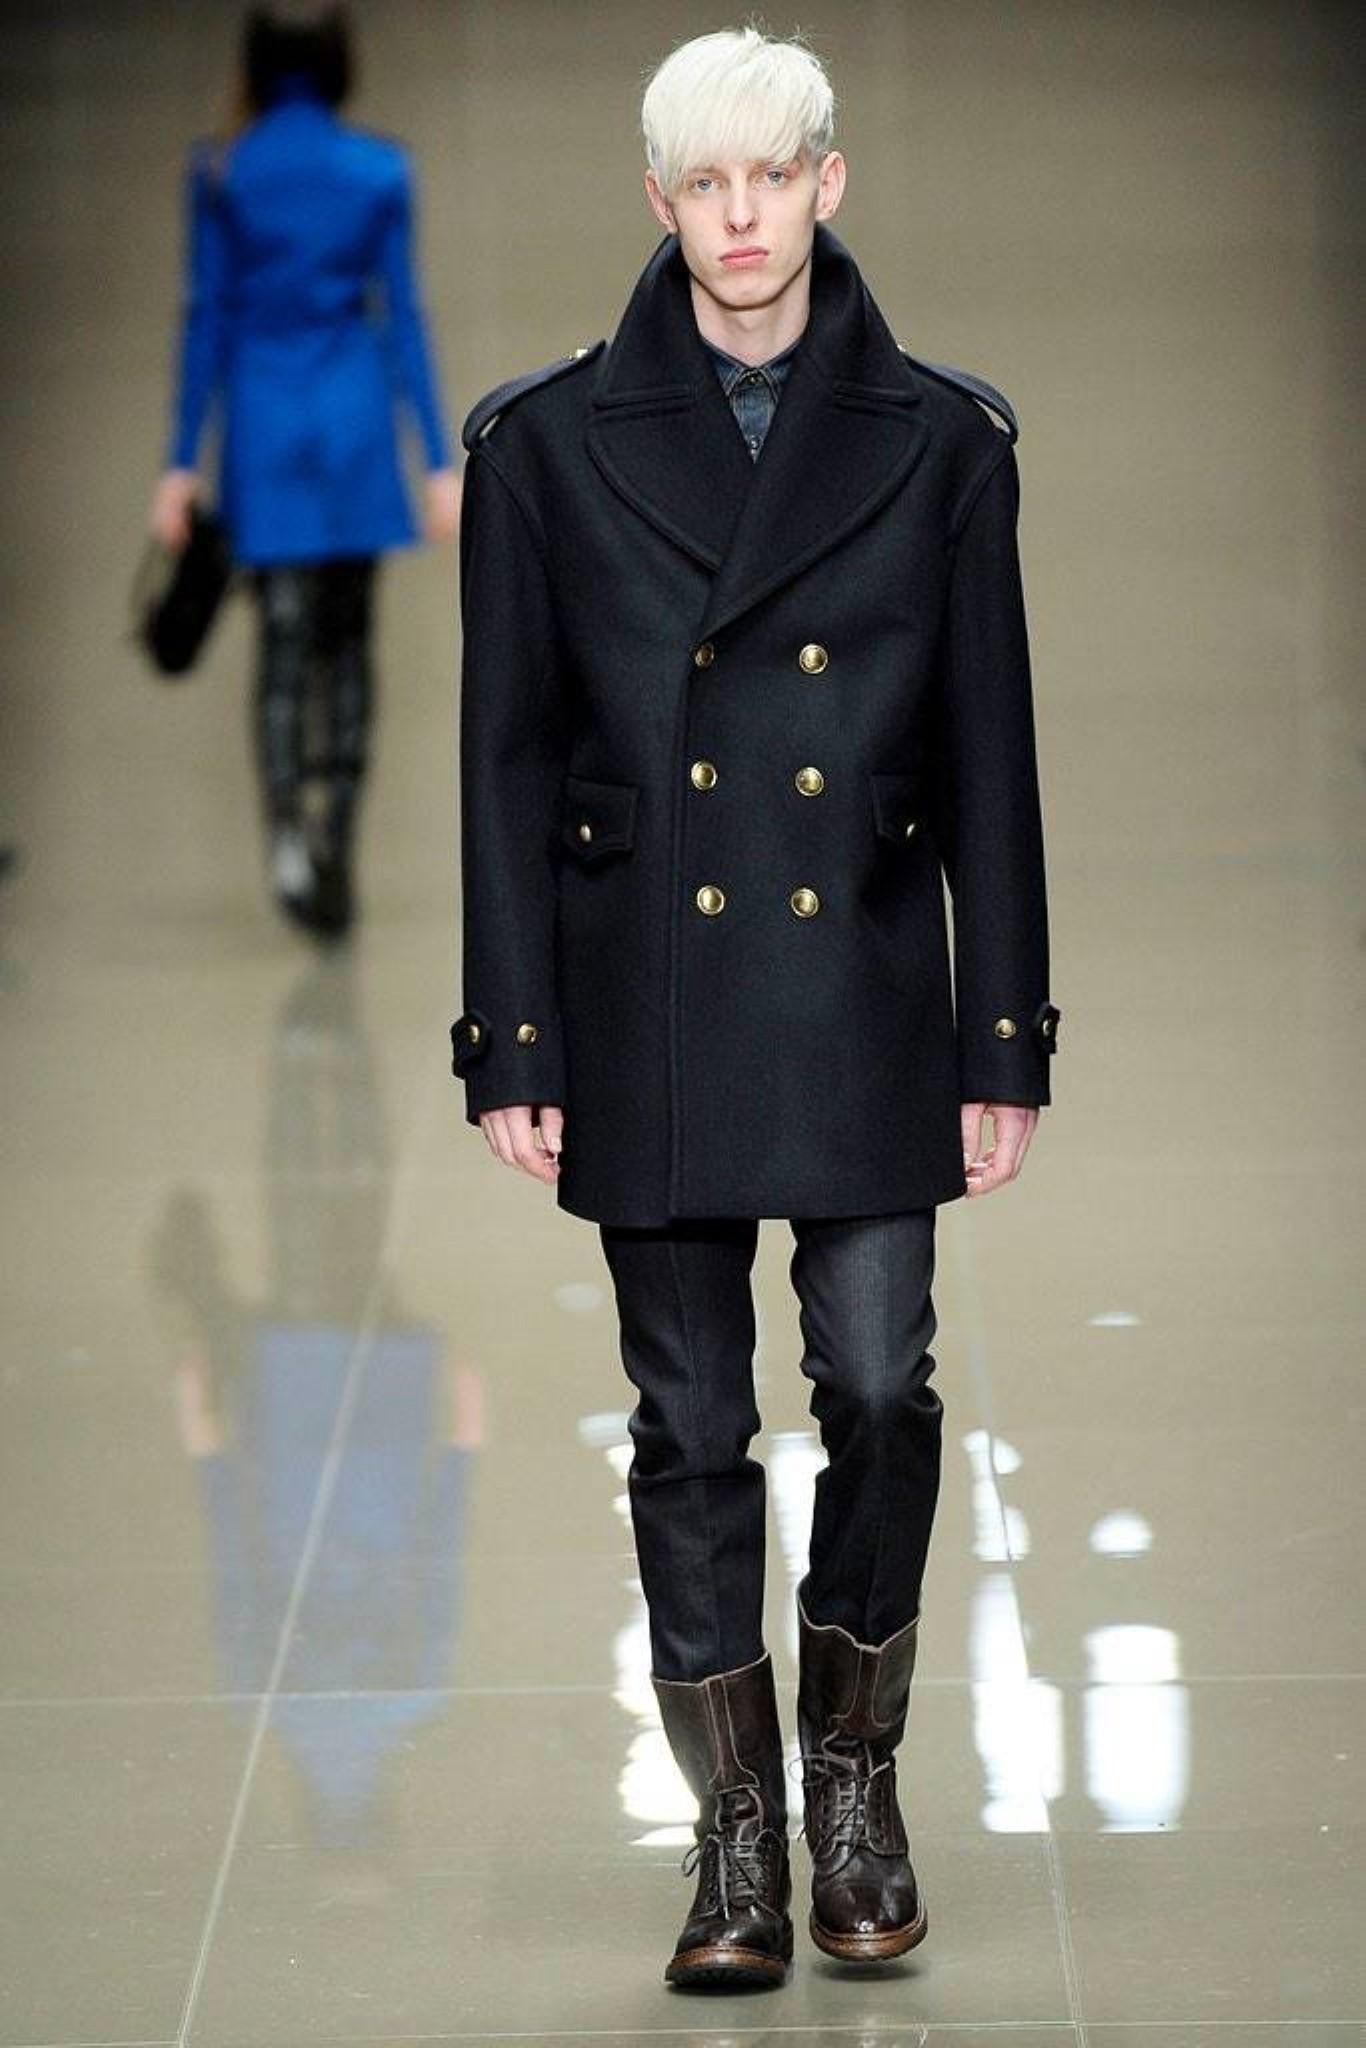 Burberry Prorsum Fall Winter 2010 Navy Oversized Double Breasted Navy Blue Peacoat by Christopher Bailey. Featuring a pointed collar, epaulets, back belt, flap pockets and button closures engraved with Burberry on each button. Signature Burberry